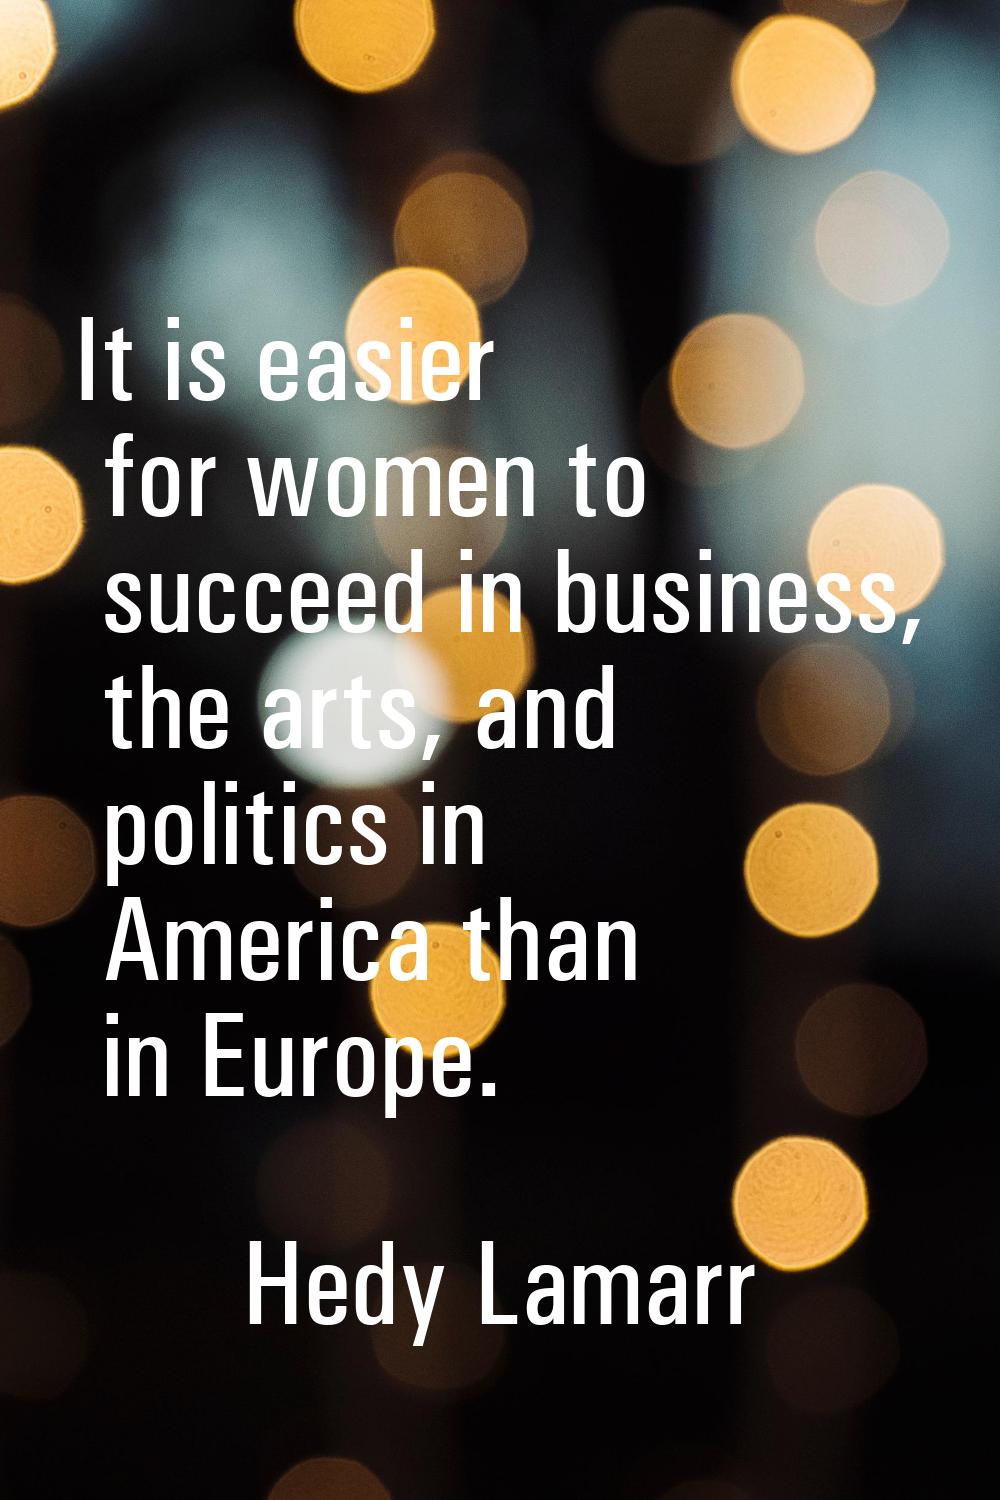 It is easier for women to succeed in business, the arts, and politics in America than in Europe.